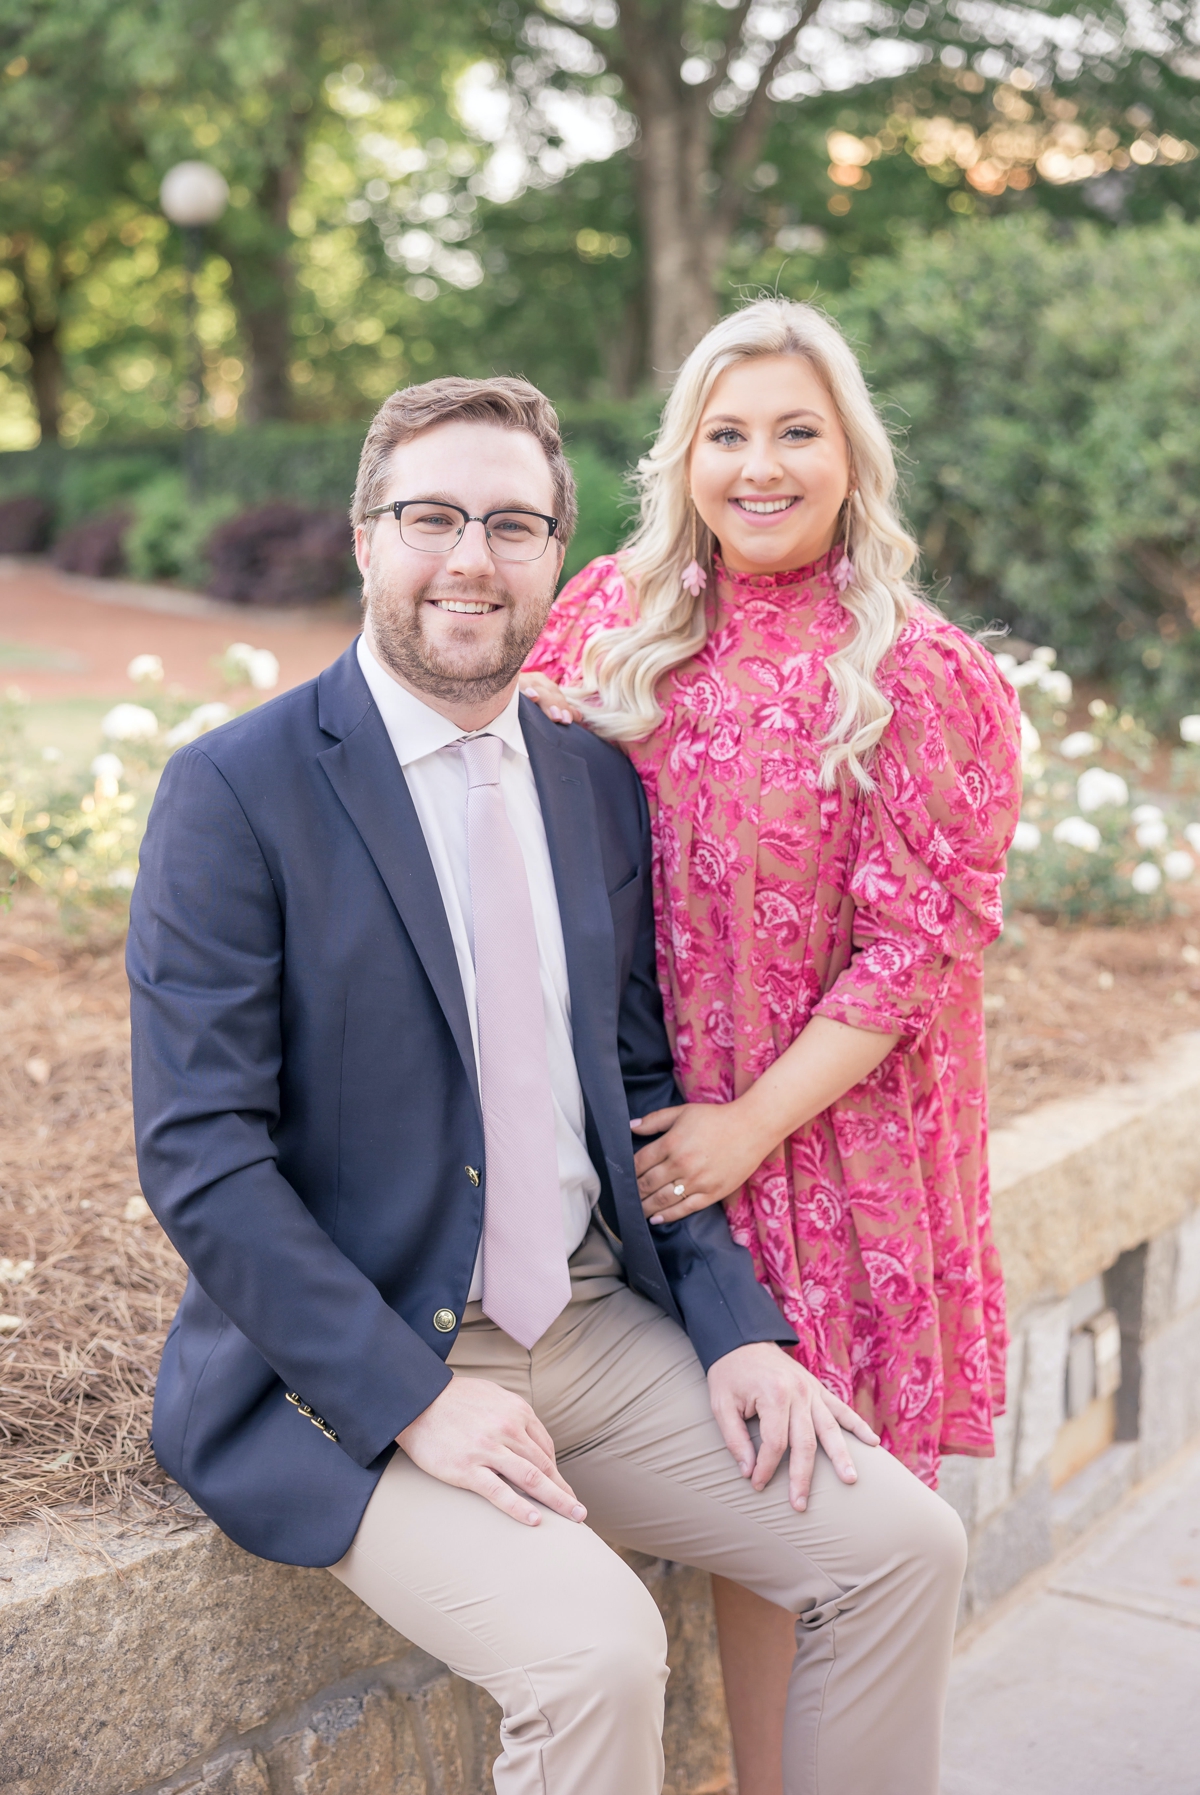 Austin and Sydney sitting on the edge of a bridge smiling during their Atlanta Athletic Club engagement session.